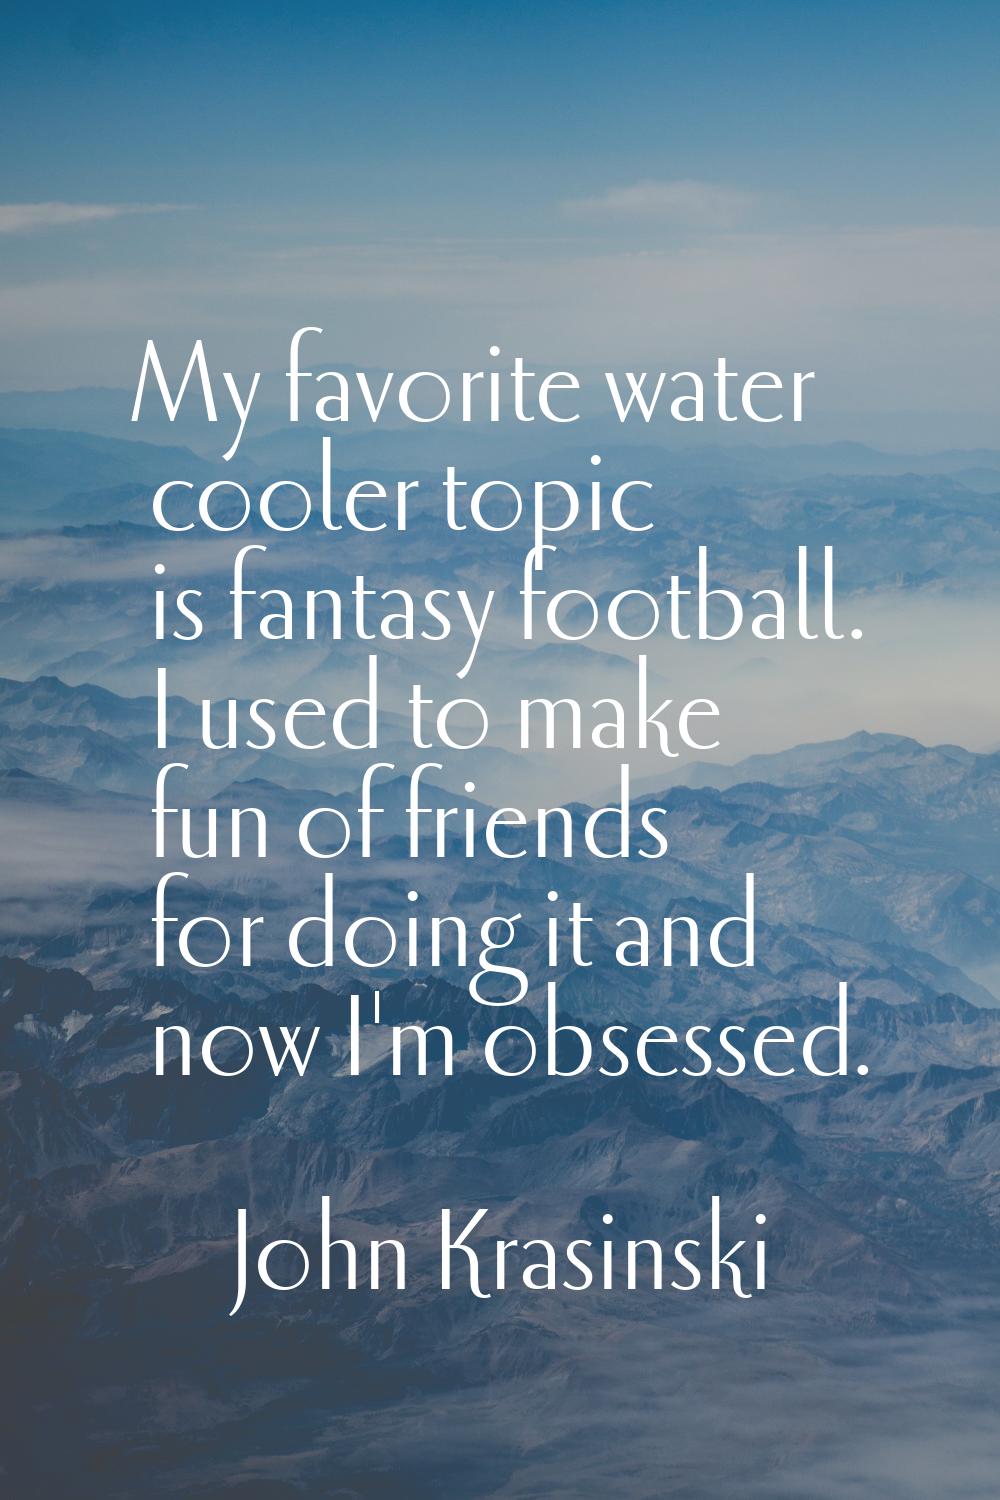 My favorite water cooler topic is fantasy football. I used to make fun of friends for doing it and 